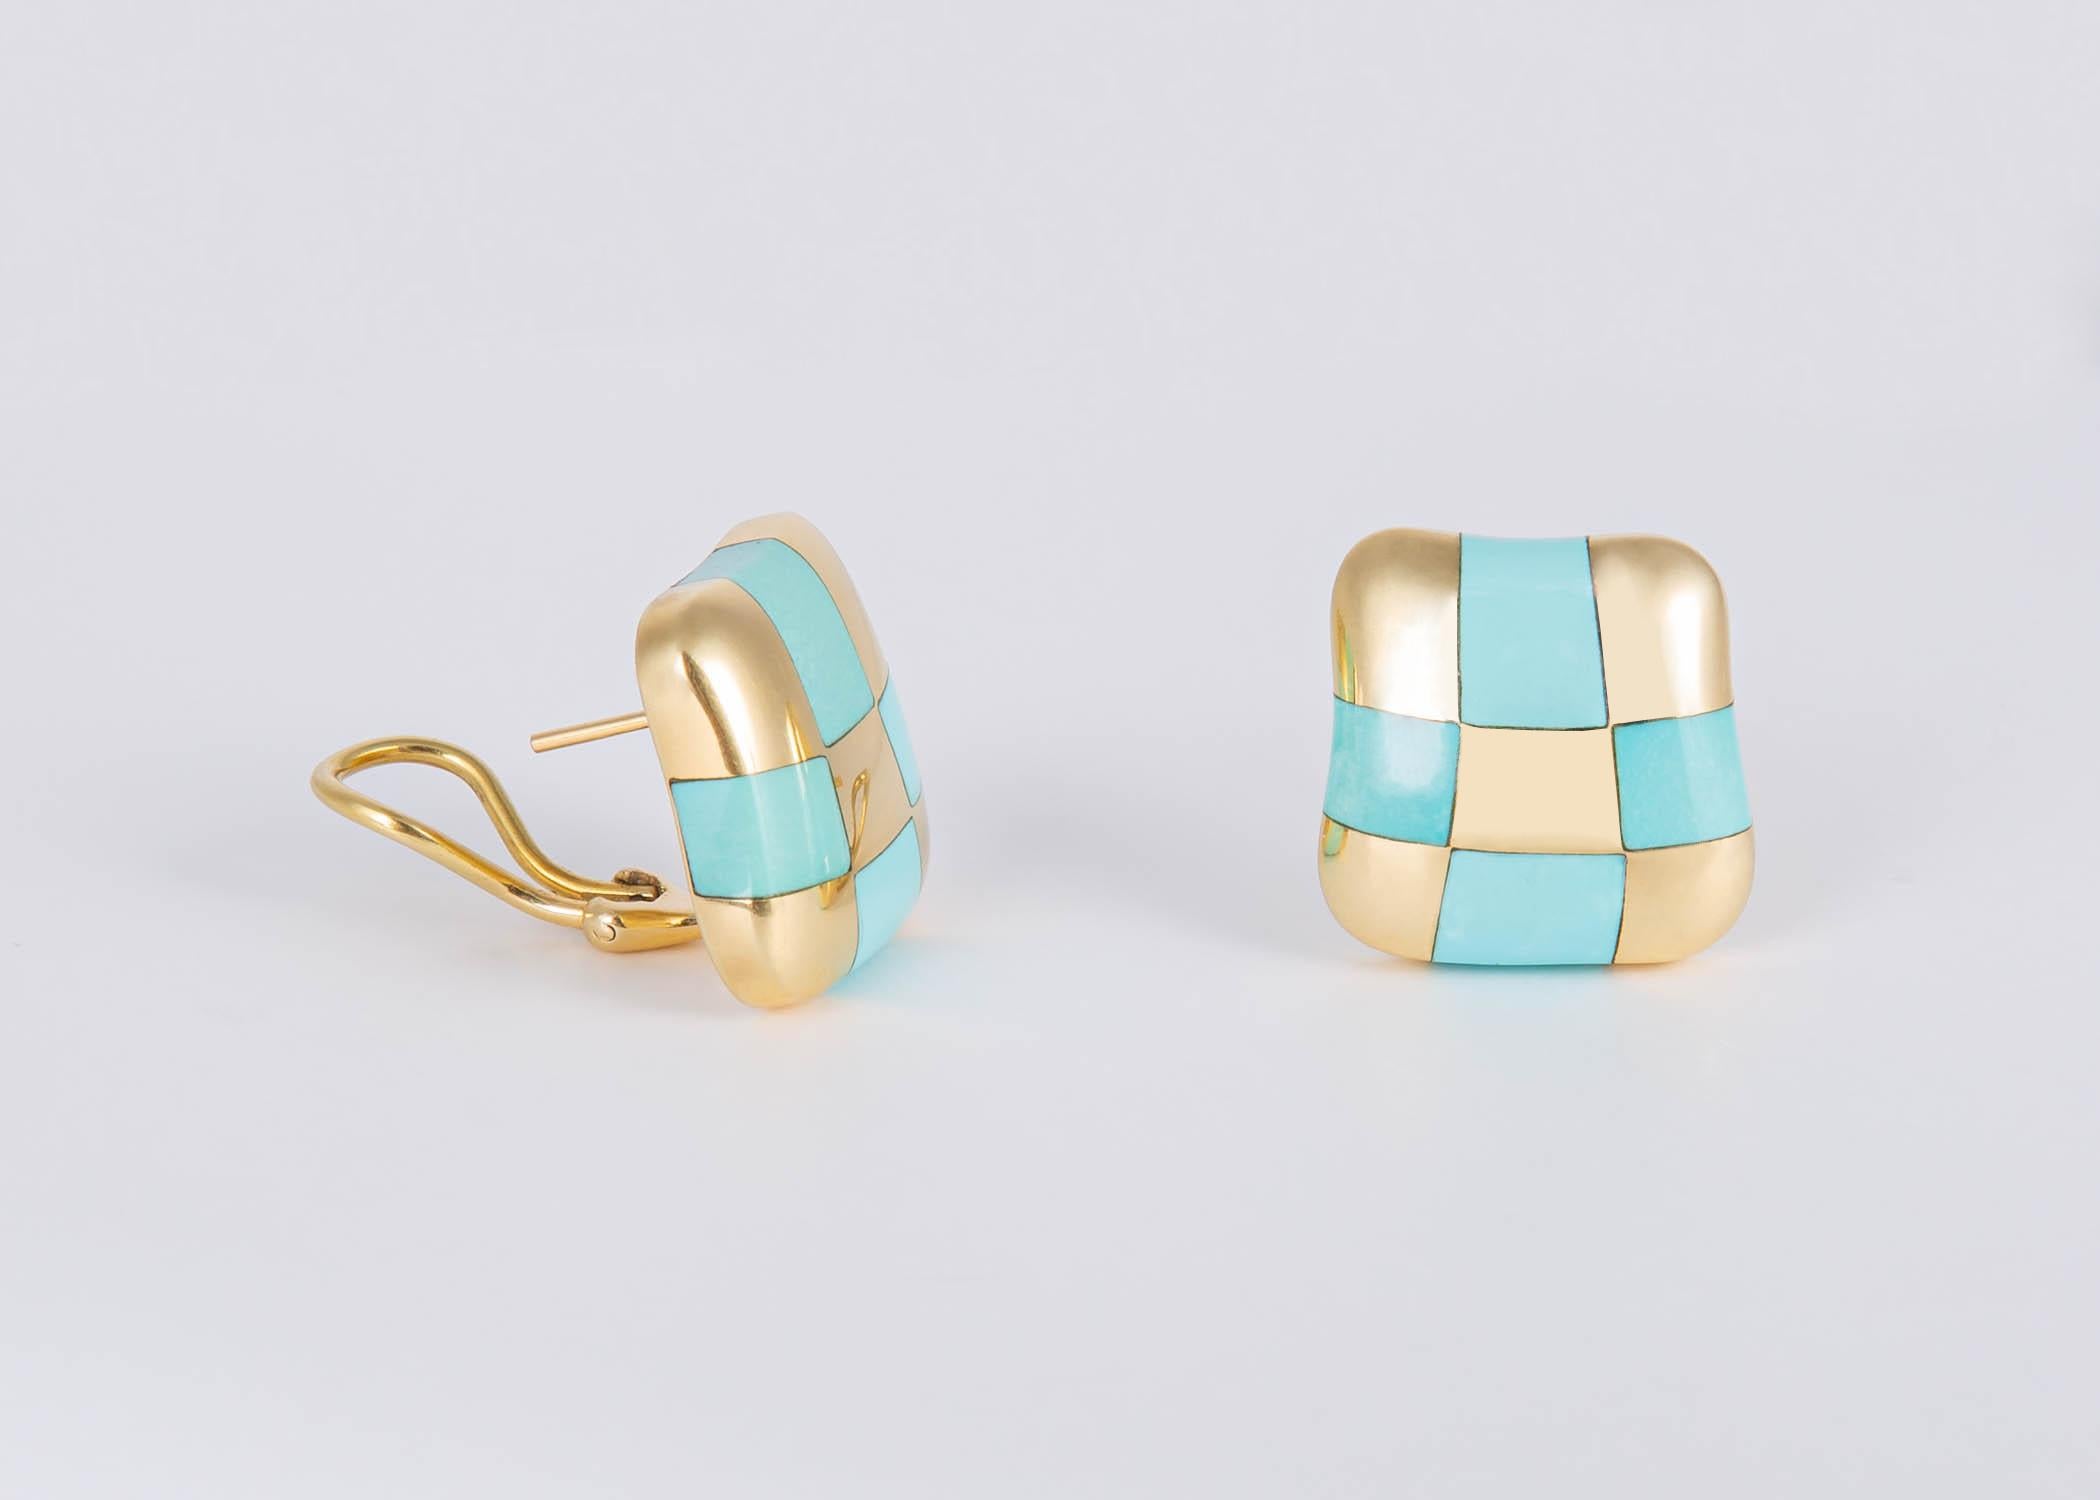 Square Cut Angela Cummings Turquoise and Gold Checker Board Earrings